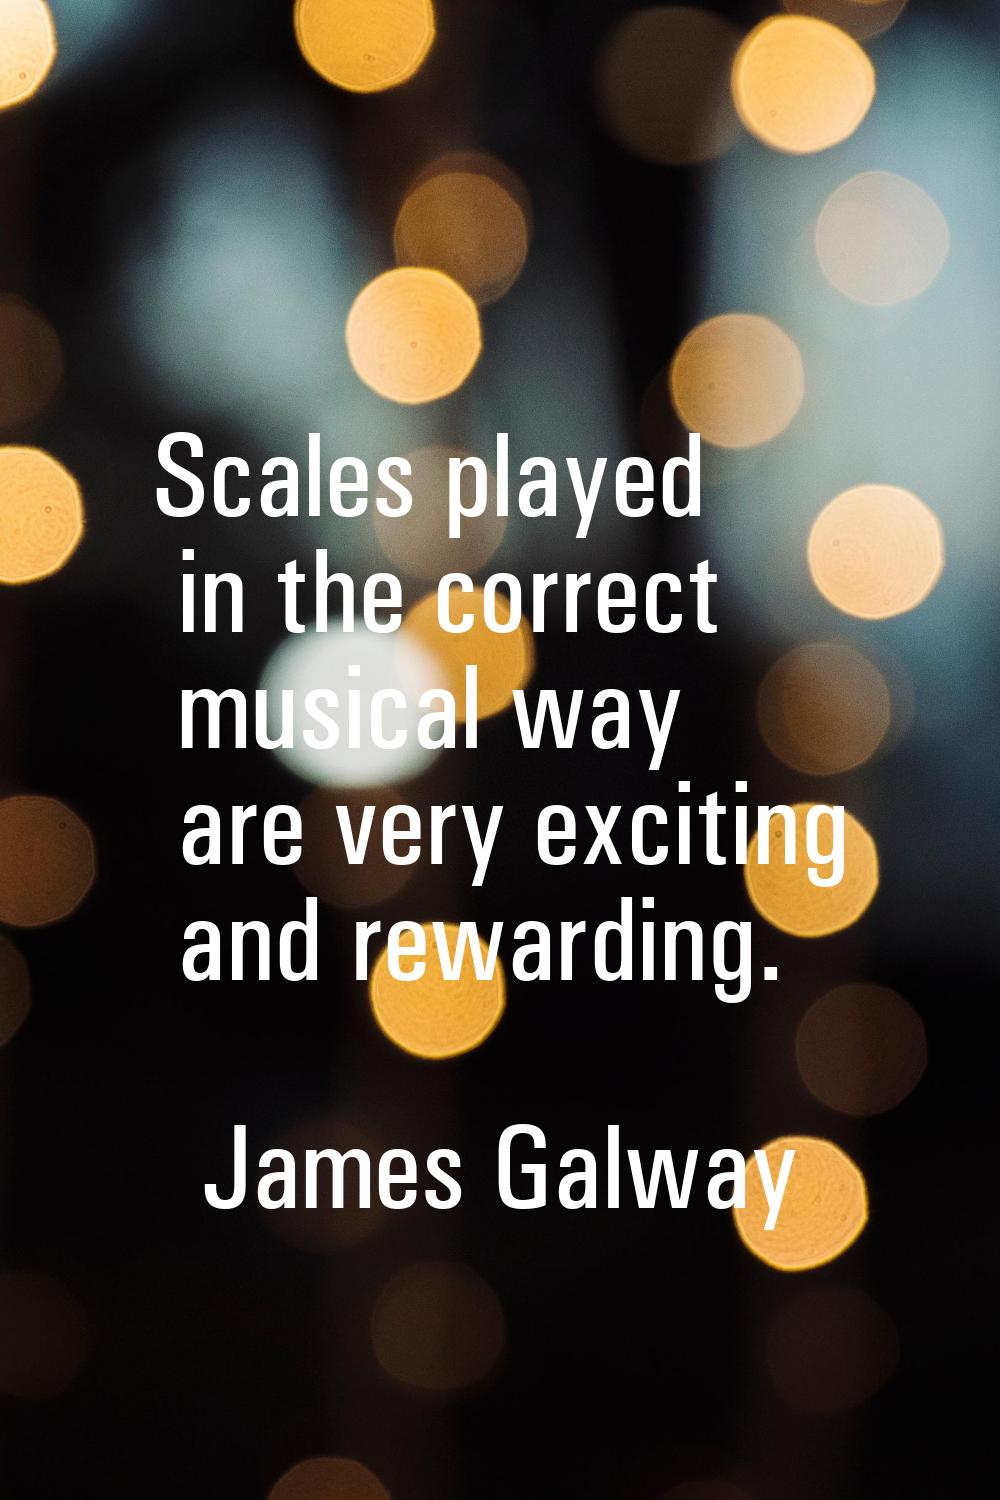 Scales played in the correct musical way are very exciting and rewarding.